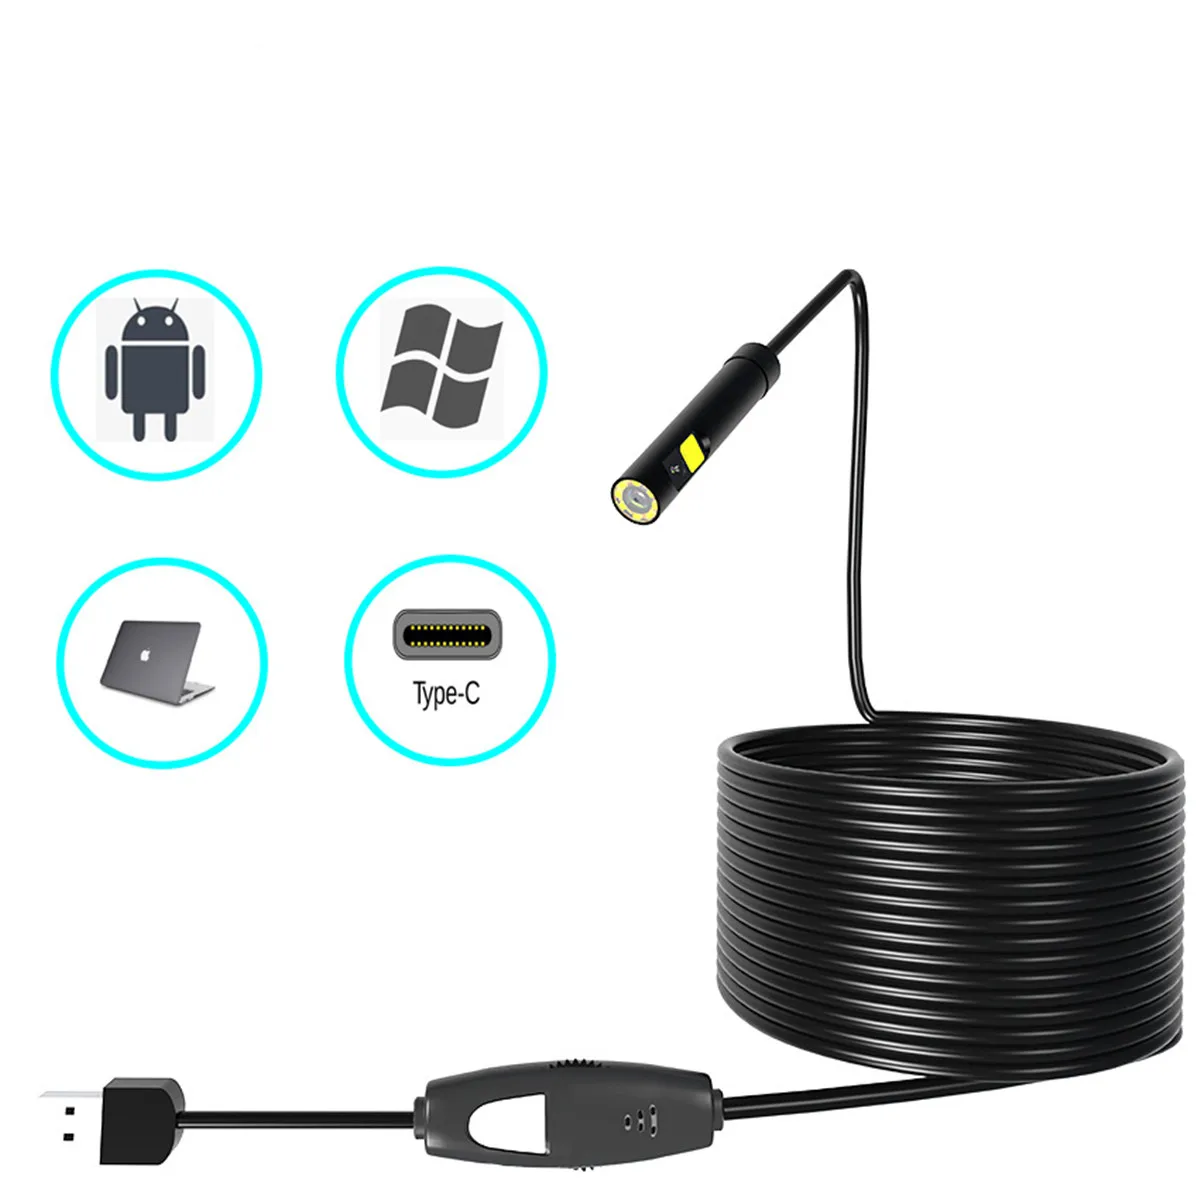 2MP 8MM 3in1 USB Dual Lens Endoscope Camera For Android&Computer CMOS Borescope Inspection  Digital Microscope Otoscope 2mp 1080p 50 1000x 3in1 usb digital microscope for android pc cmos borescope handheld endoscope inspection otoscope camera